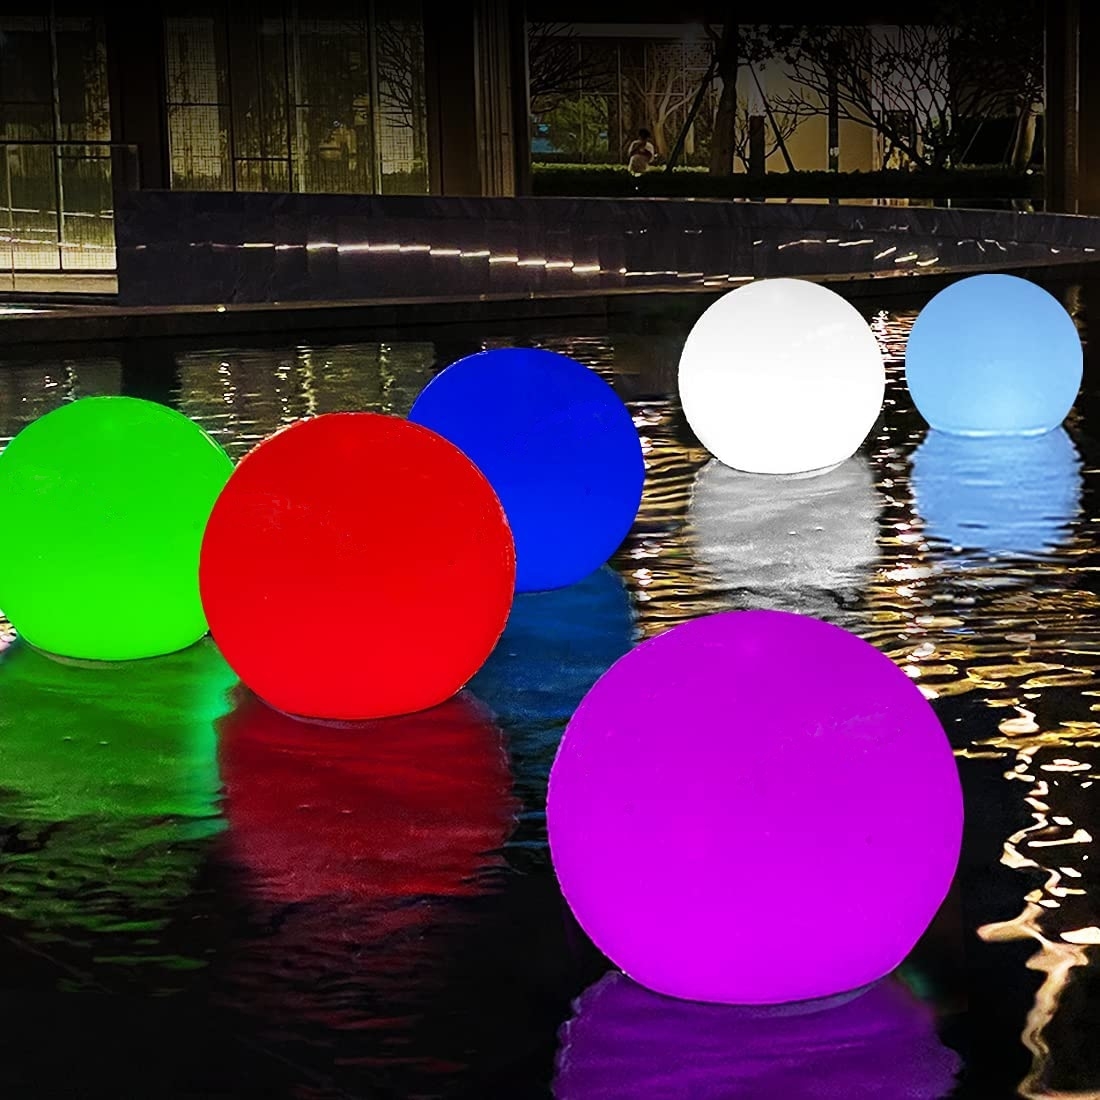 Ball 40cm waterproof floating solar Led light rechargeable battery